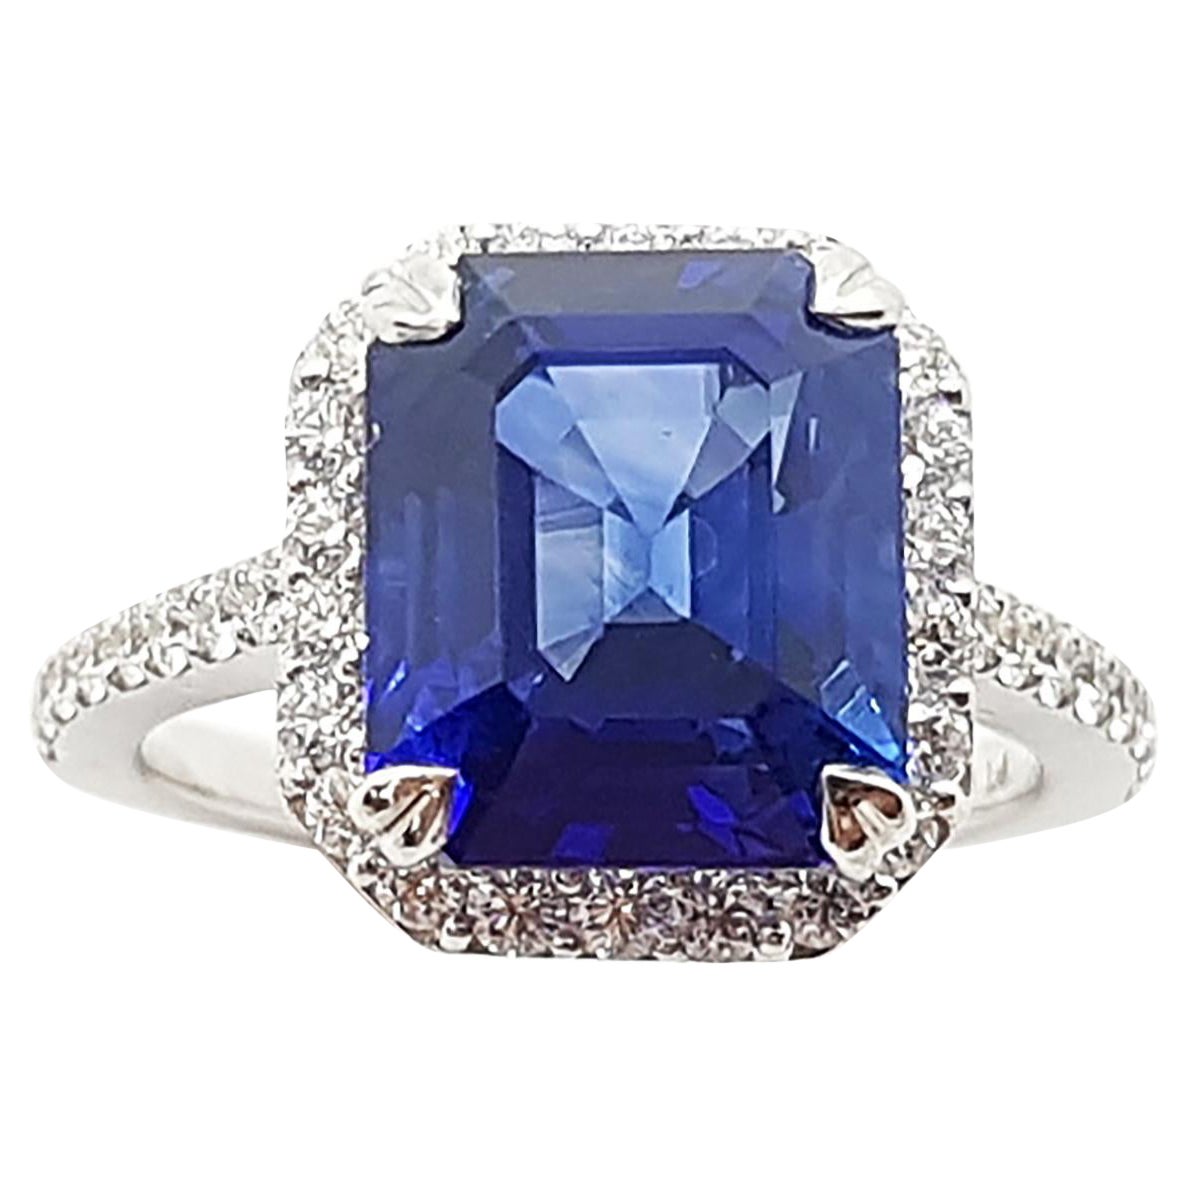 GRS Certified 5 Cts Ceylon Blue Sapphire with Diamond Ring in Platinum 950